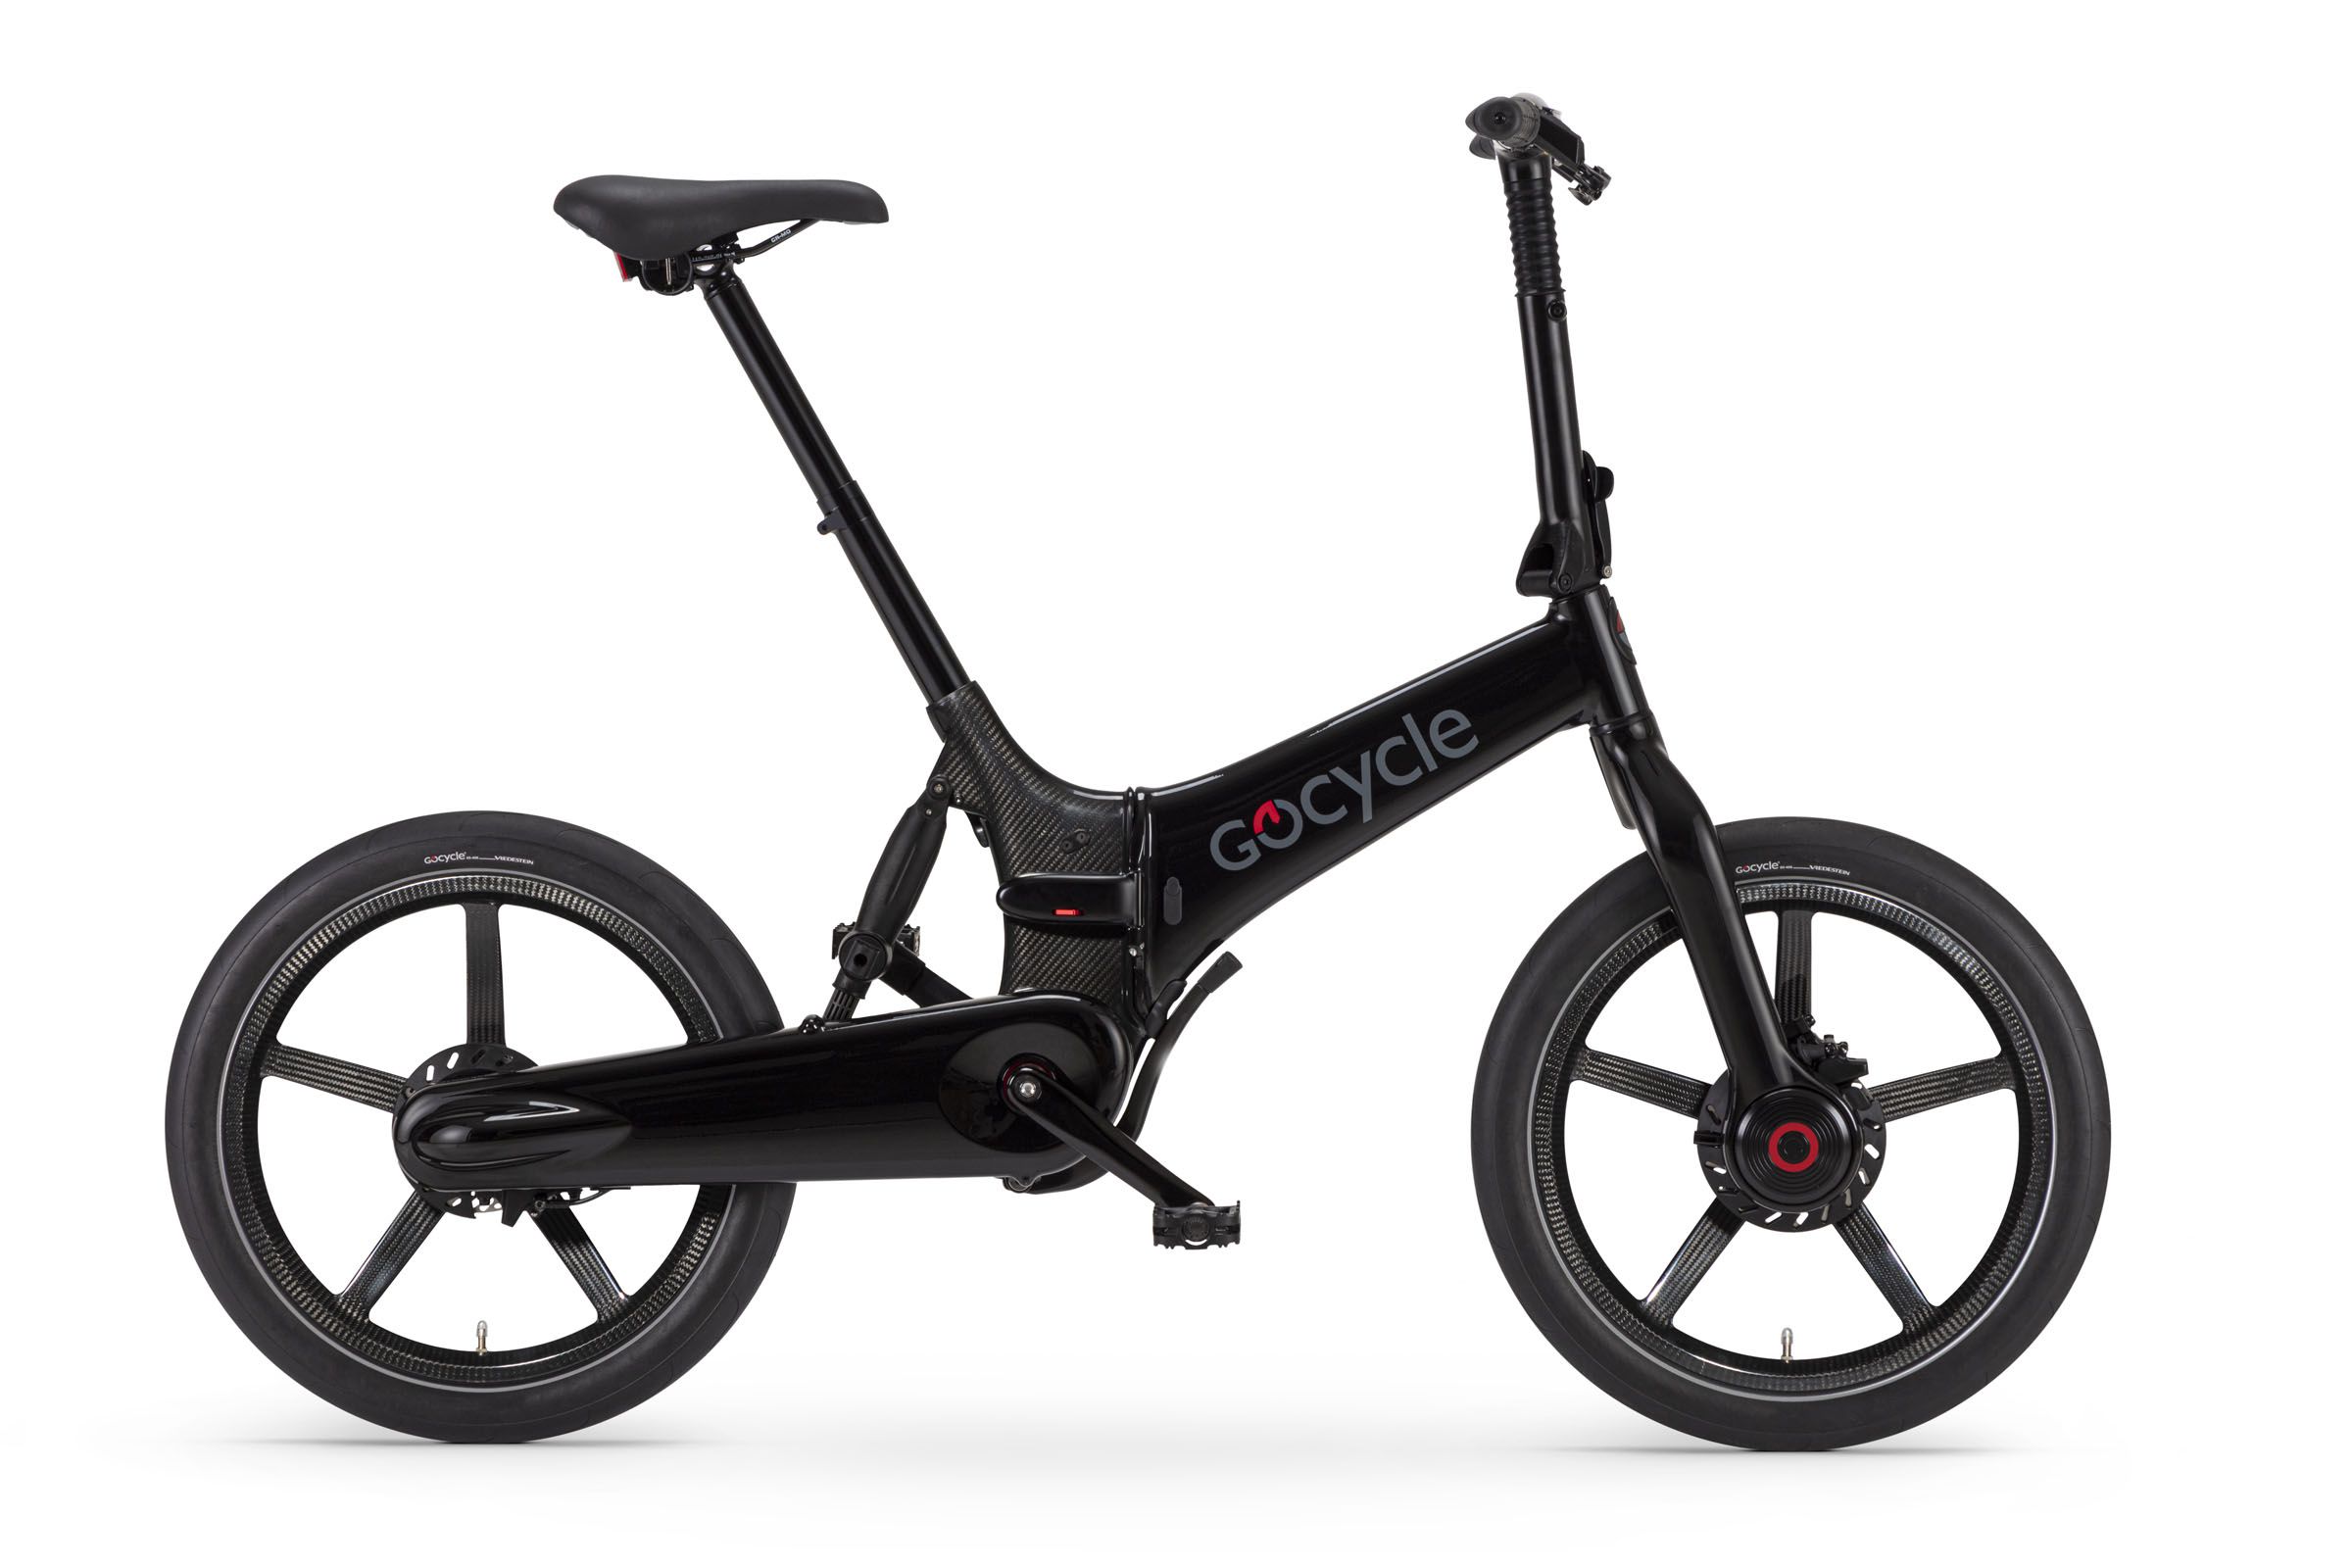 The top-of-the-line G4i Plus in gloss black with carbon wheels.